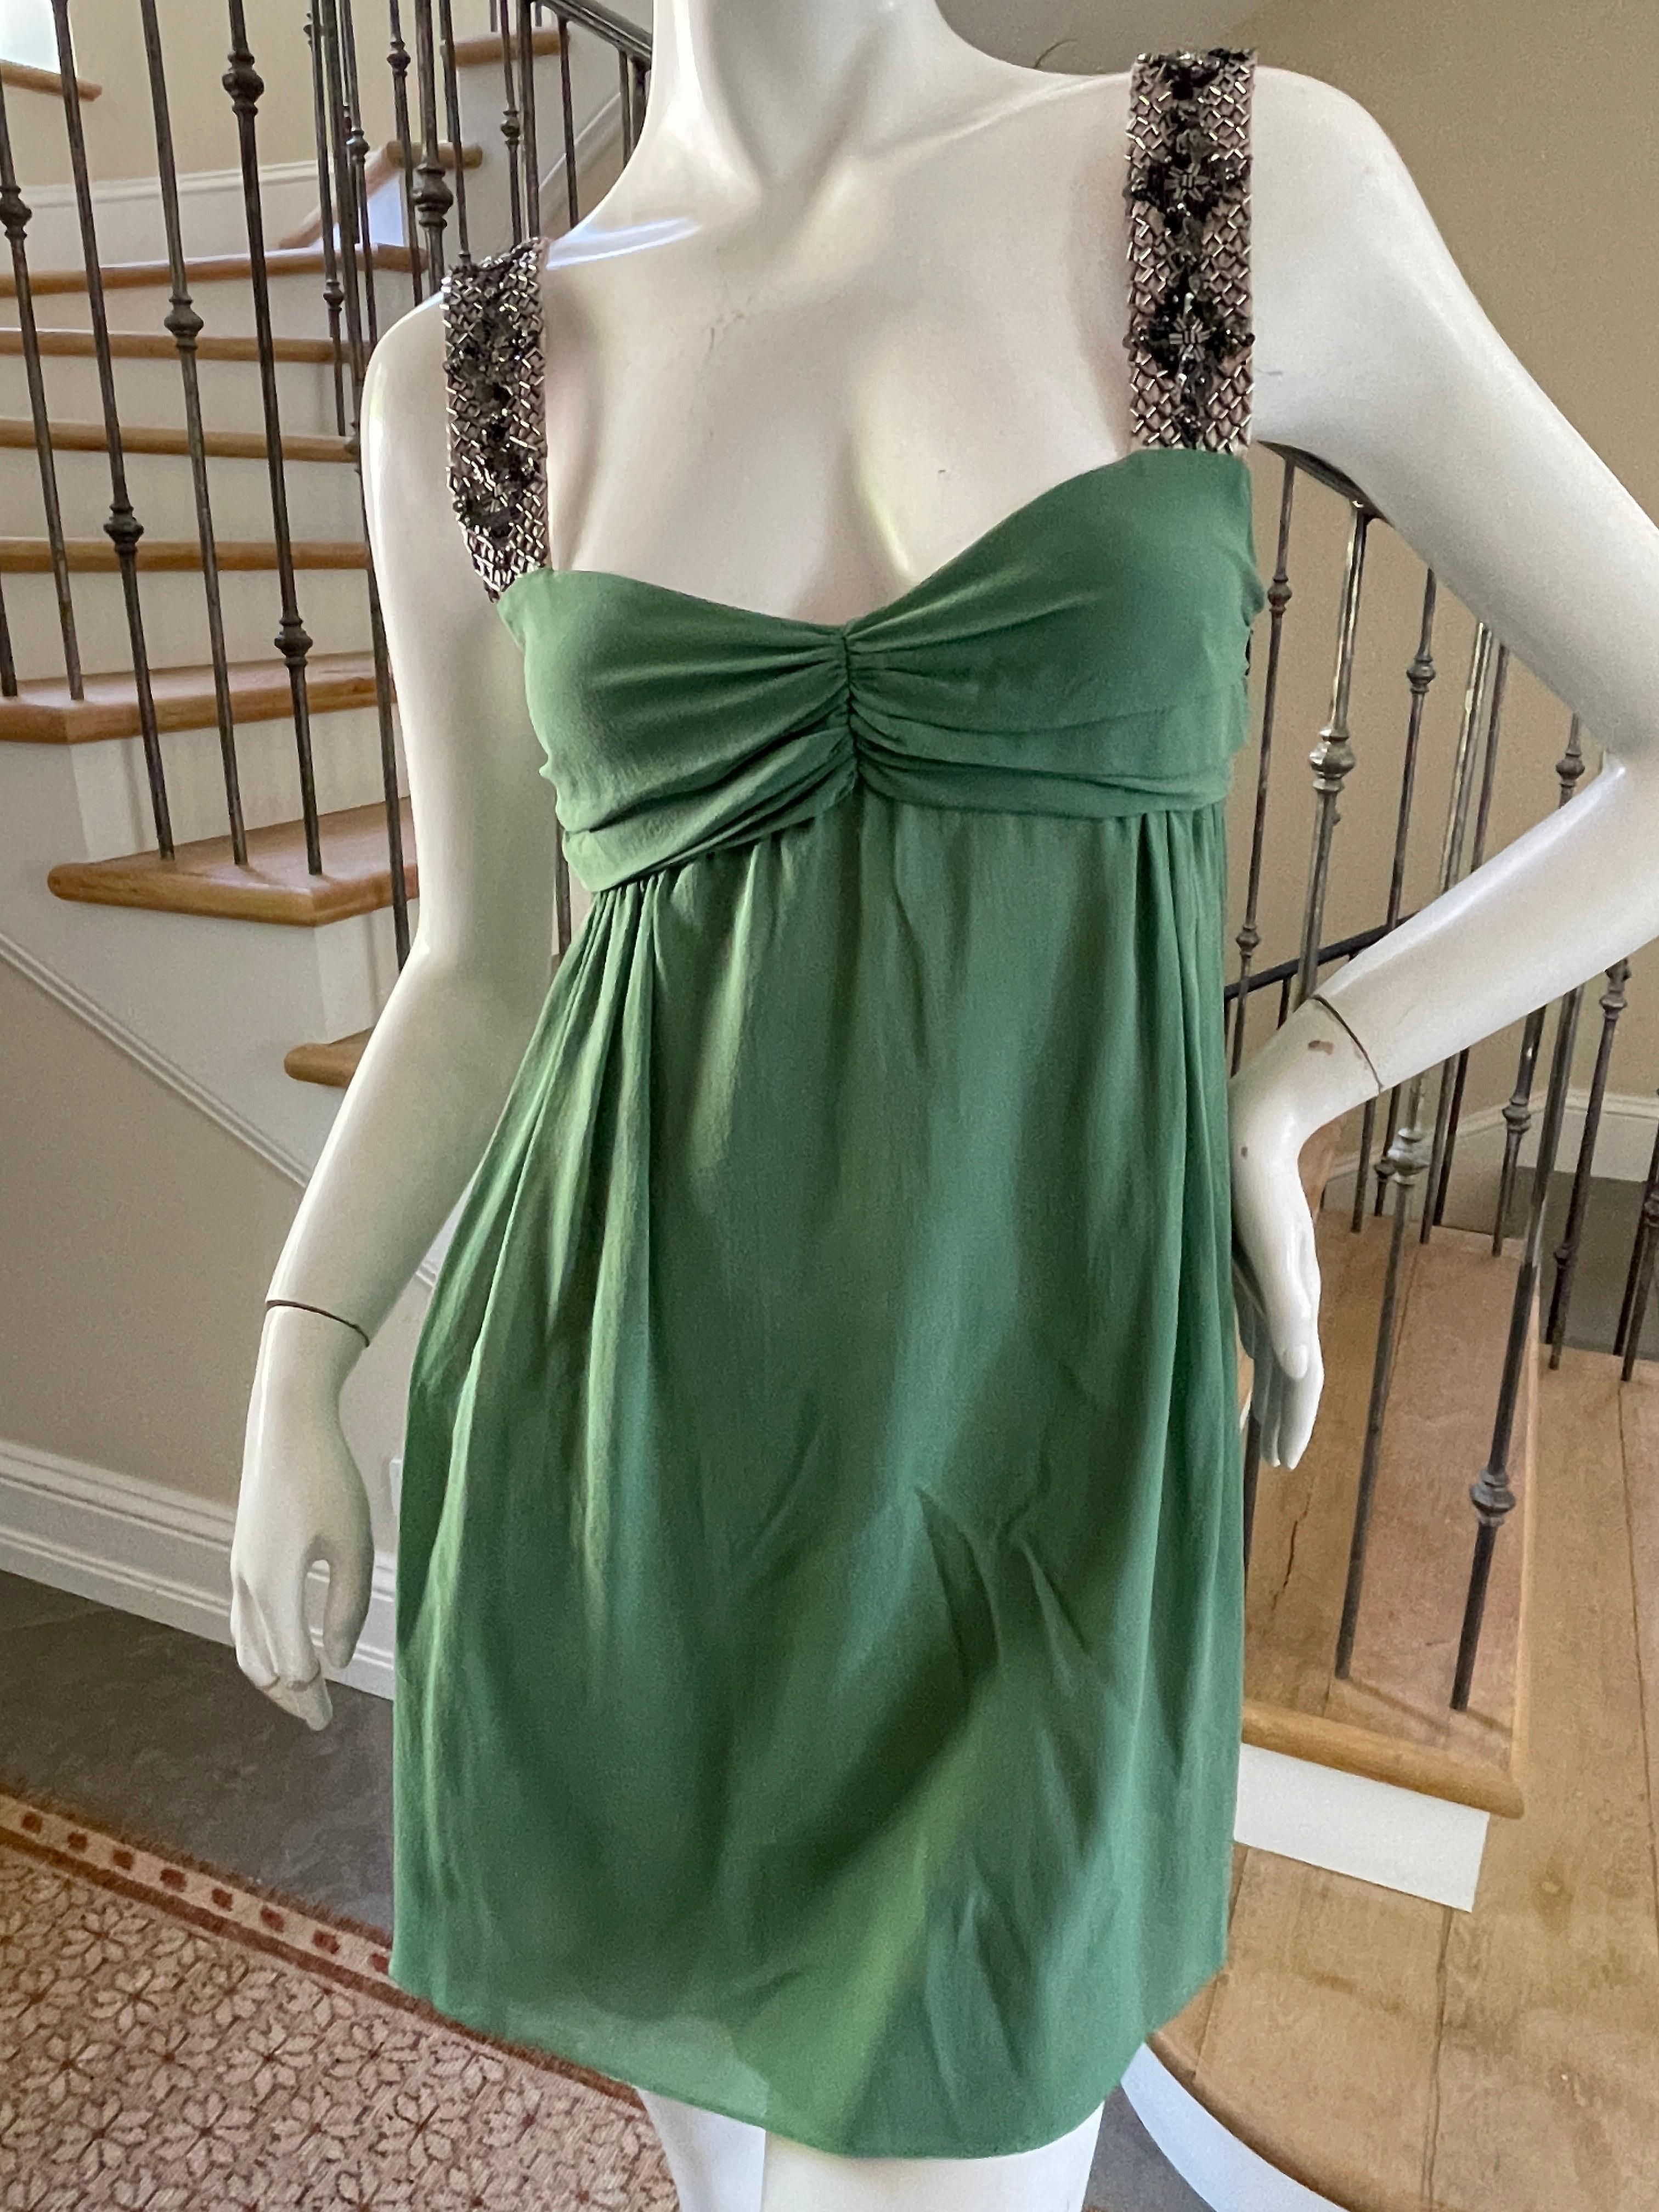  Gianfranco Ferre Vintage Green Silk Embellished Baby Doll Dress 
So pretty, use zoom feature to see details.
 Size 42
 Bust 34